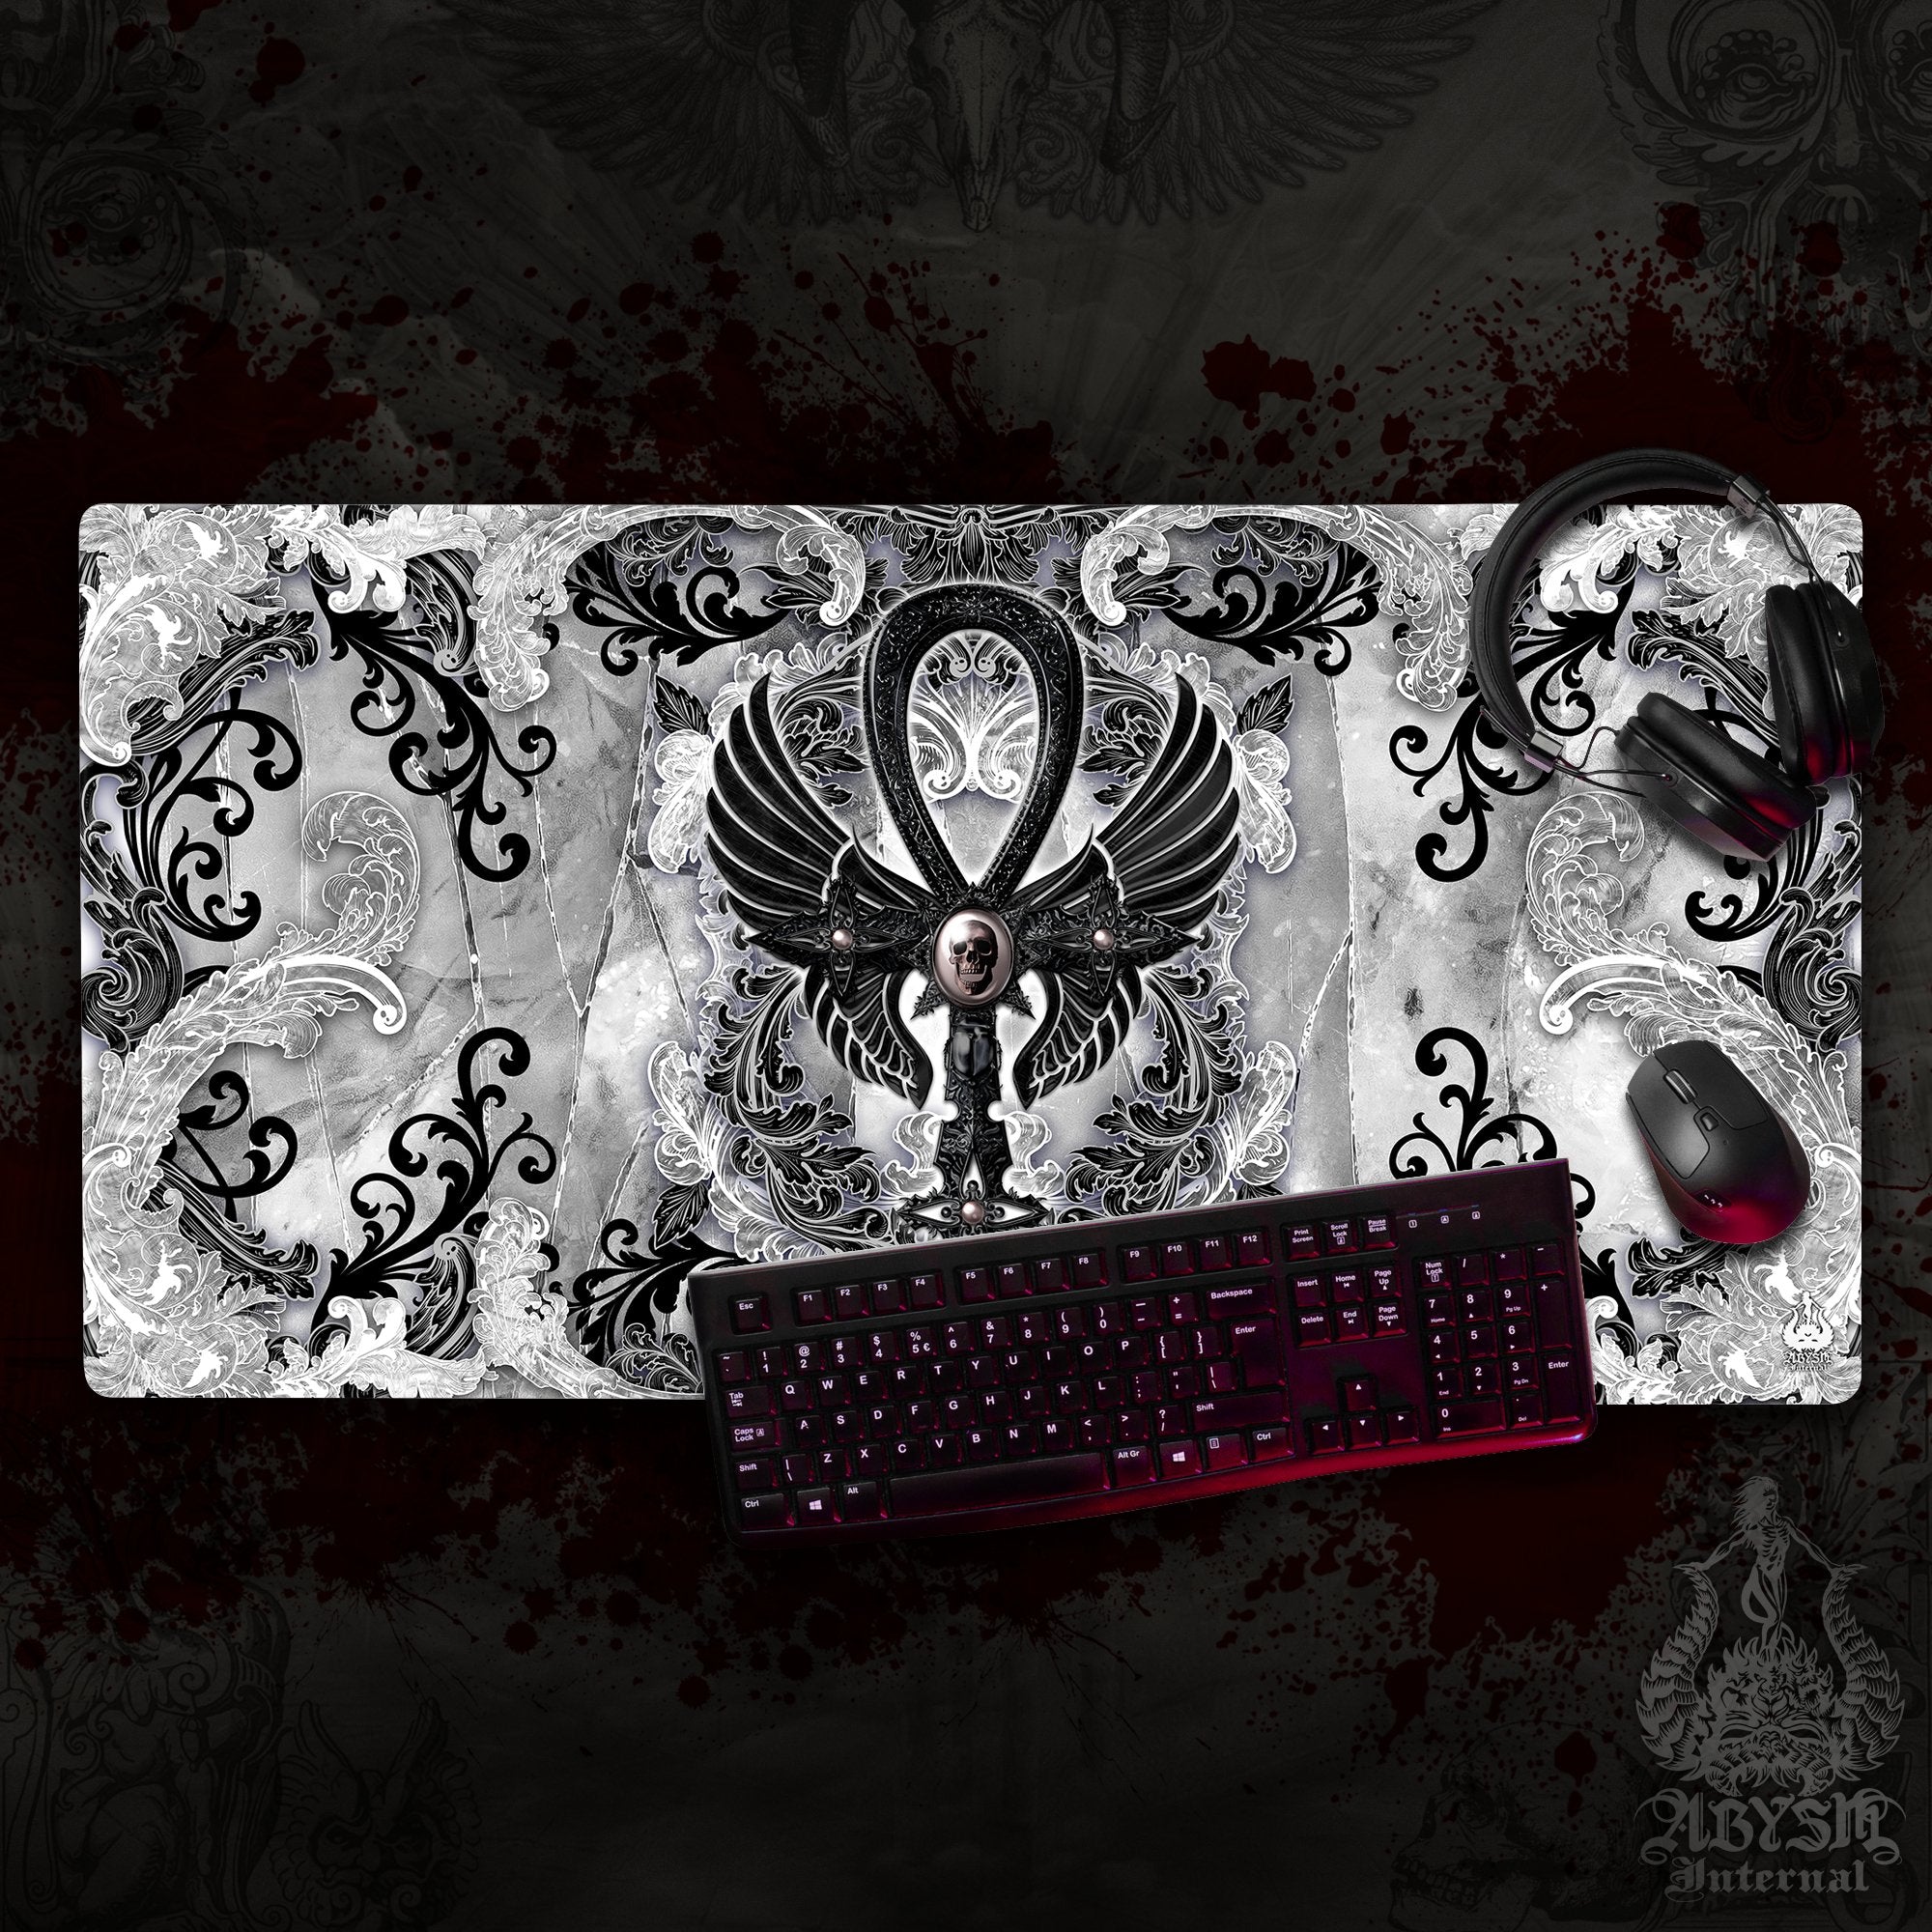 White Goth Workpad, Black Ankh Desk Mat, Gaming Mouse Pad, Cross Table Protector Cover, Skull Art Print - Abysm Internal